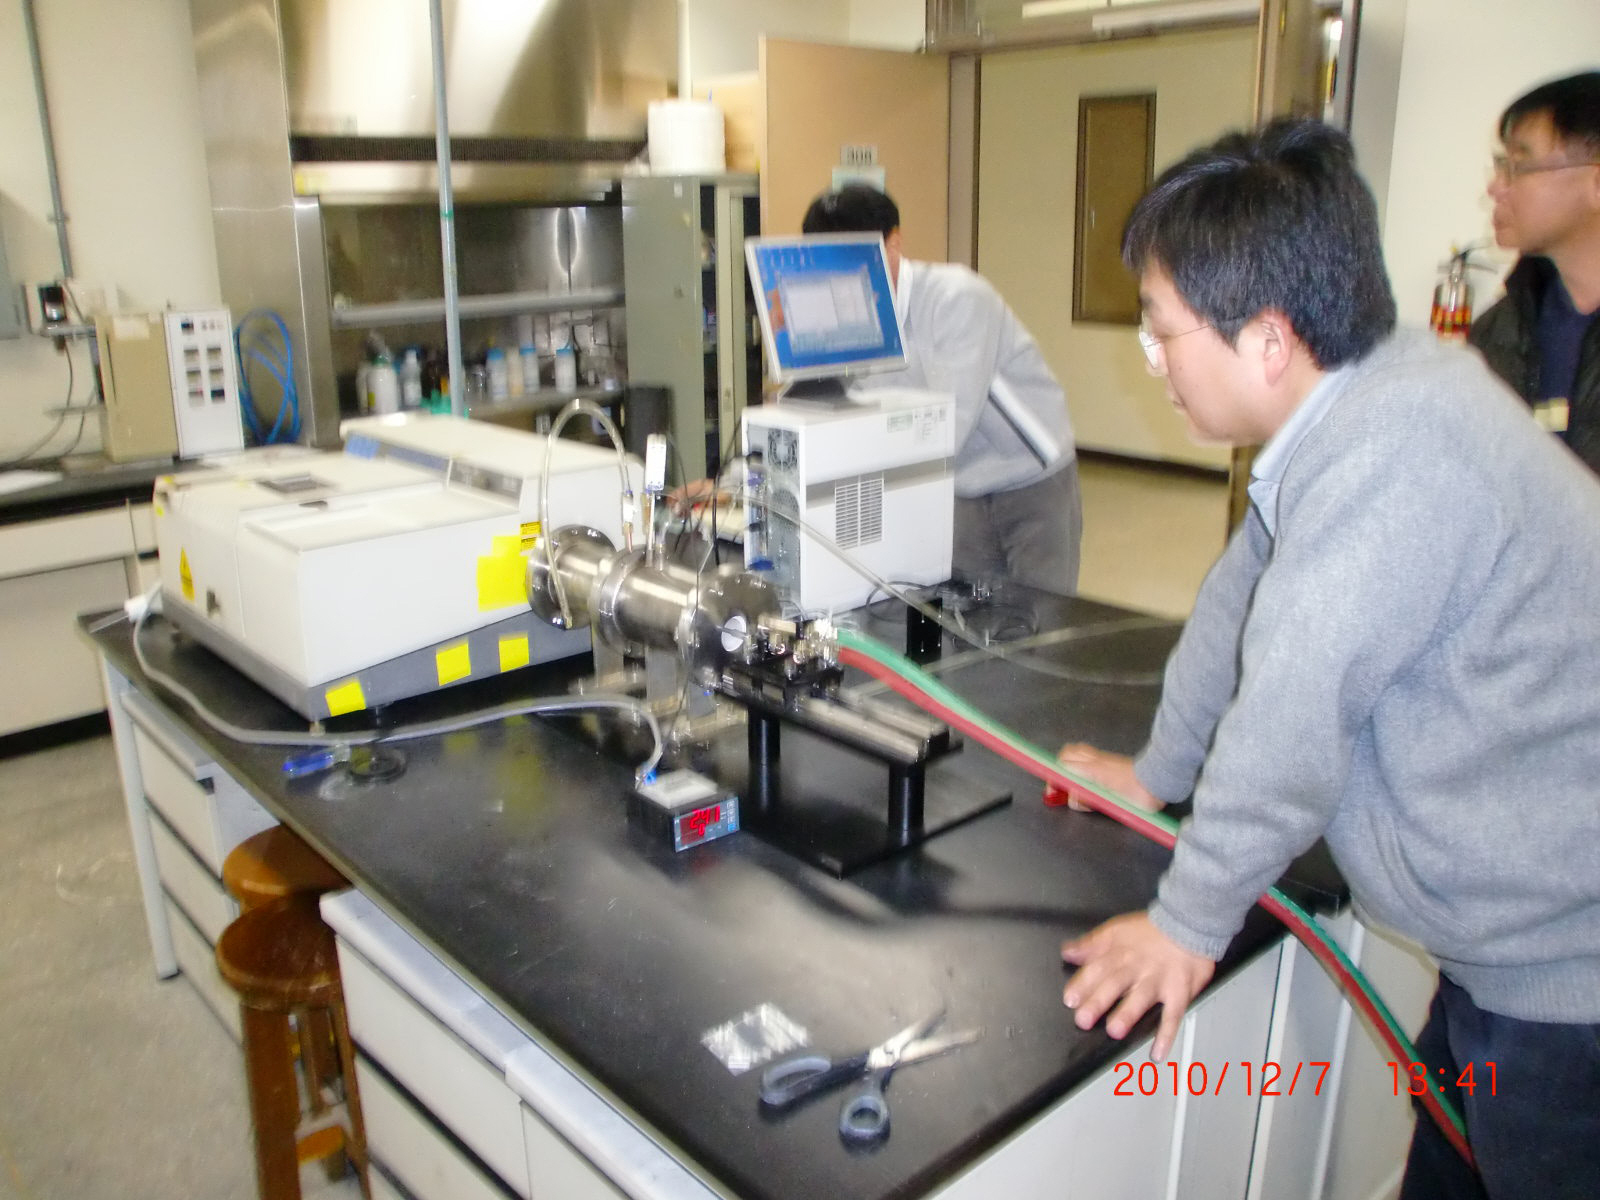 Apparatus of thermal radiation spectrum measurements being operated by Mr. Jung.